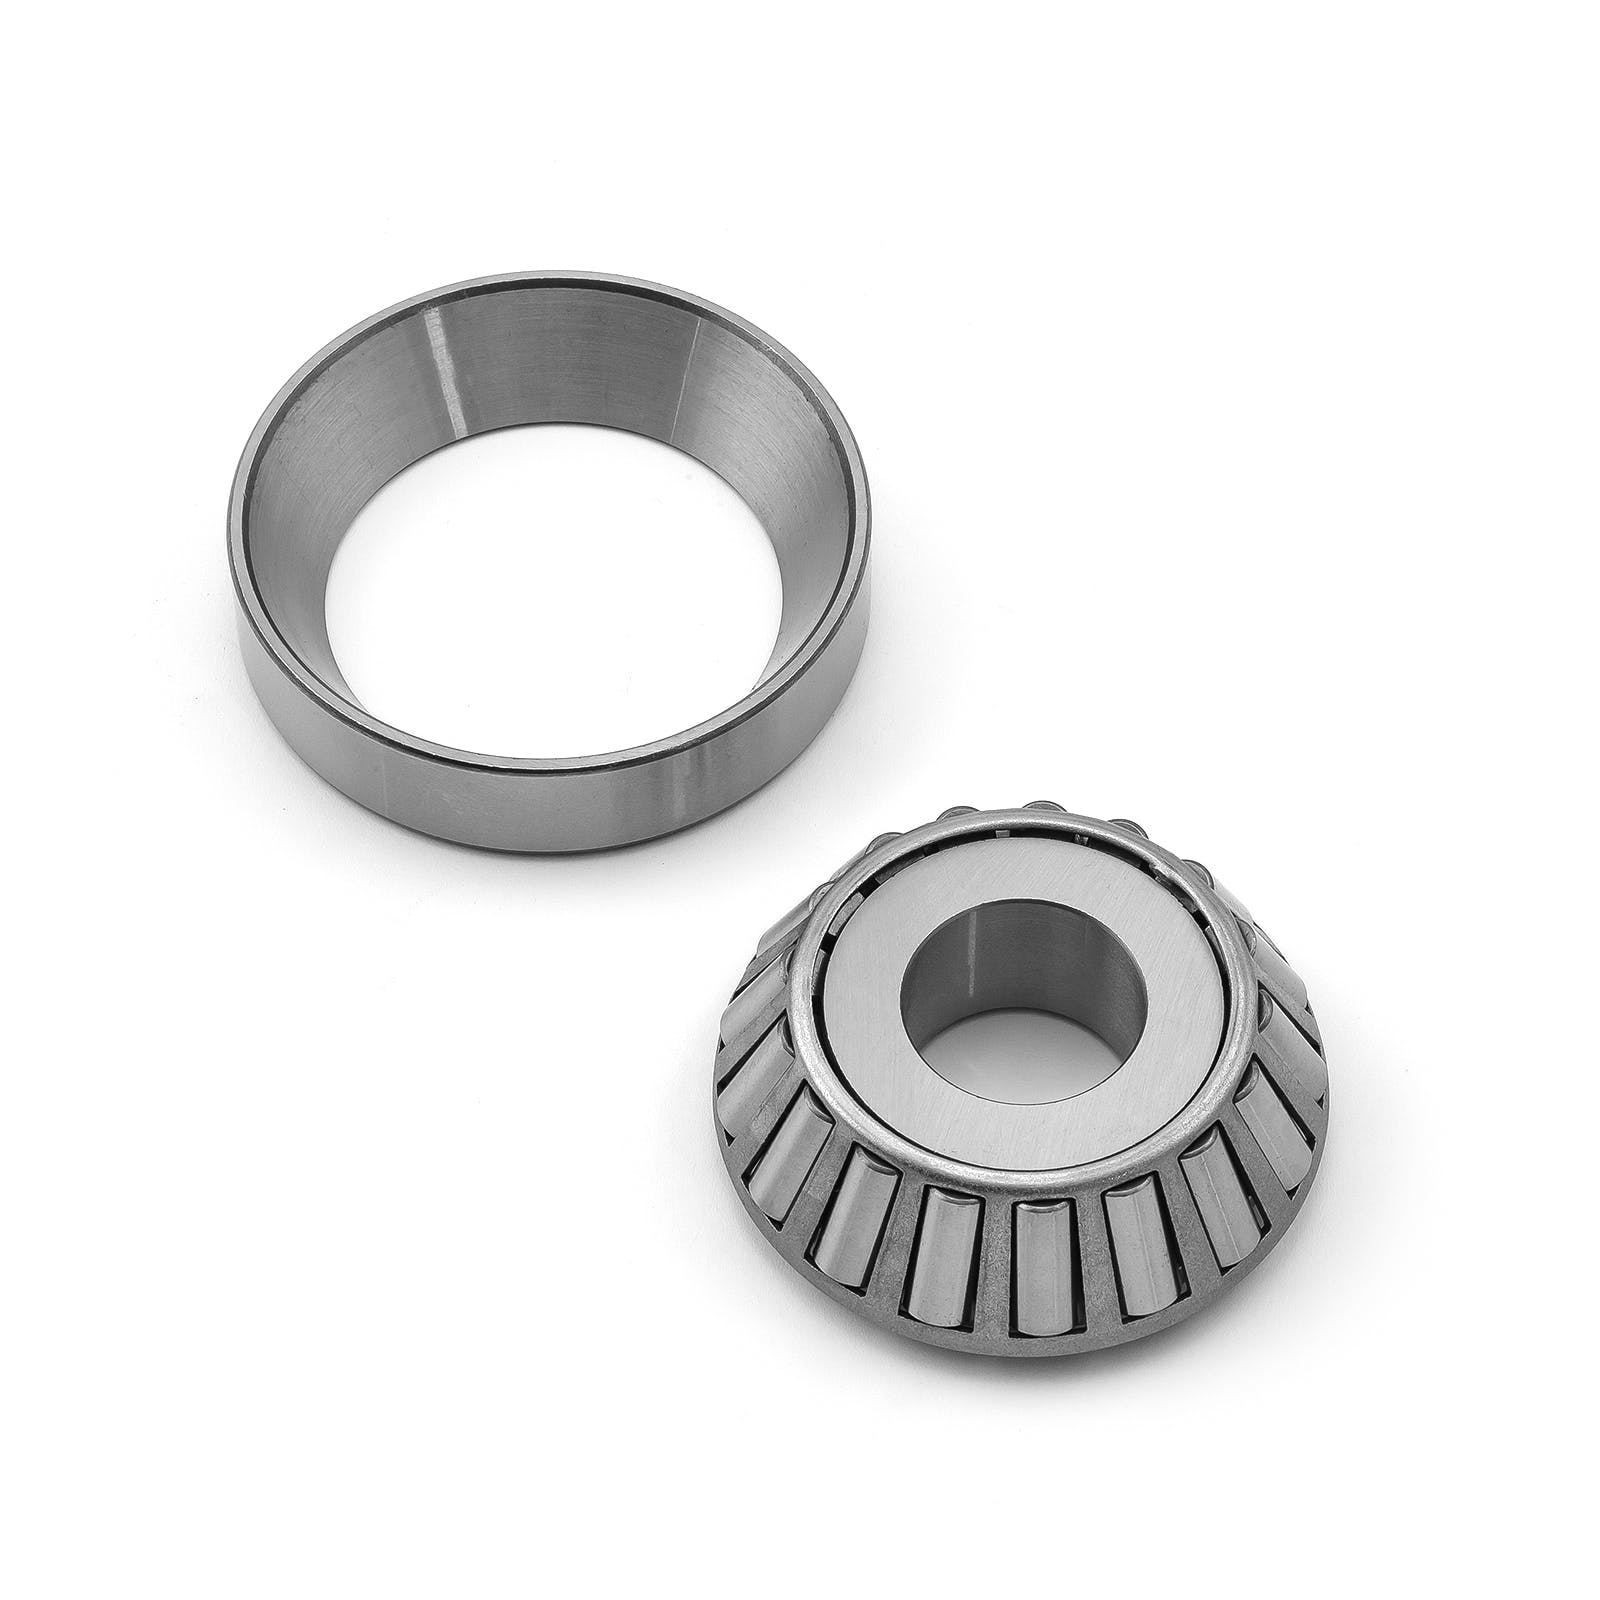 Speedmaster PCE207.1010 Pinion Bearing w/ 1.3125 Journal to suit Oversize Pinion Support